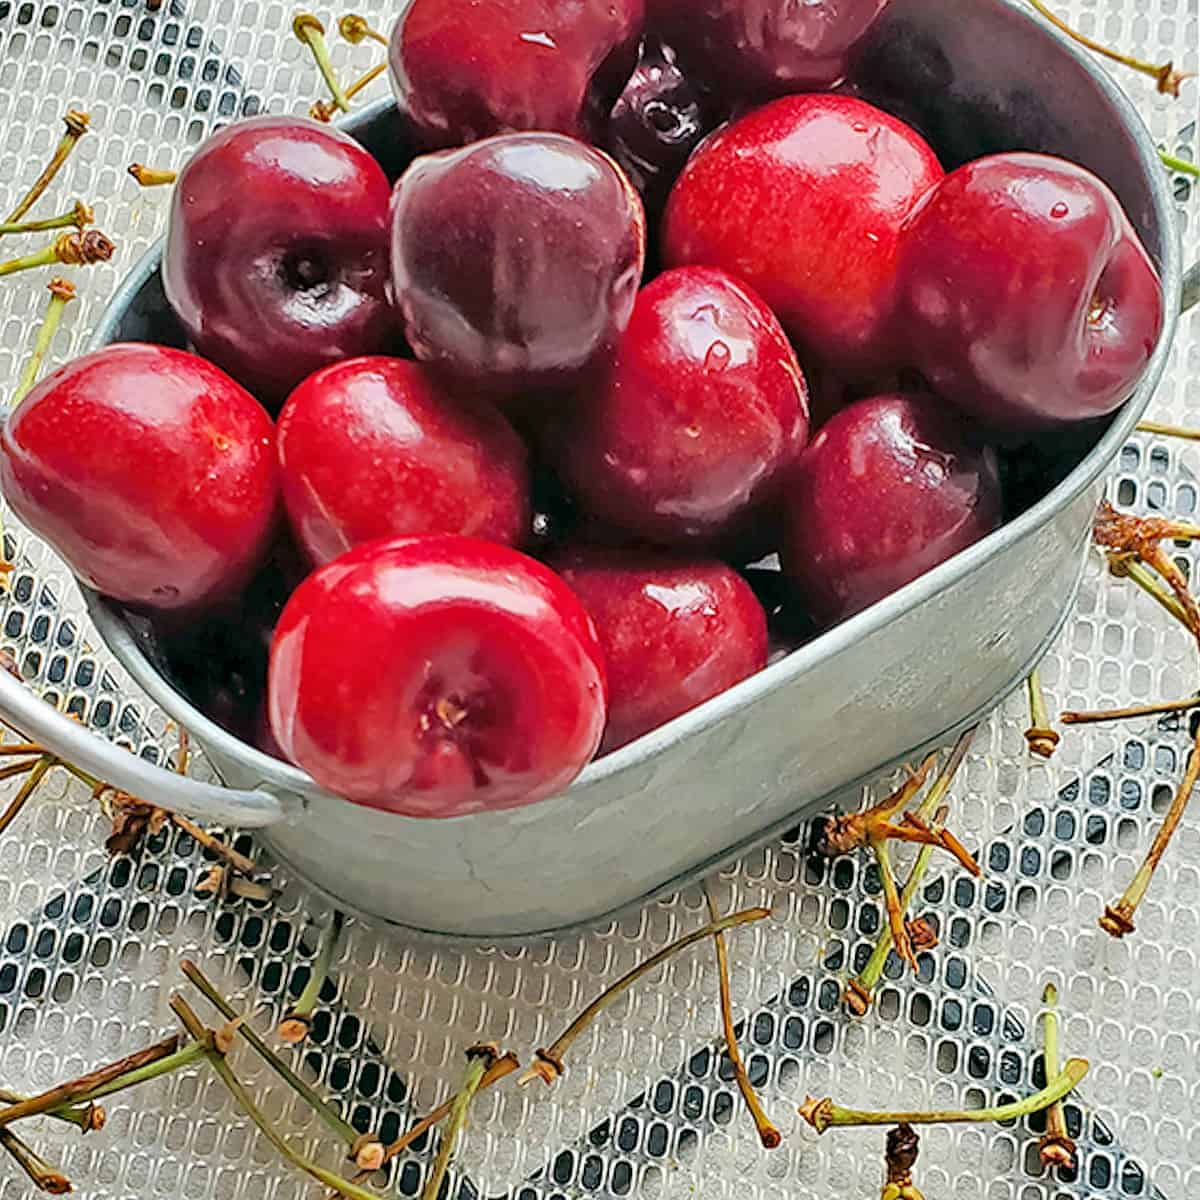 Cherries in a metal container and cherry stems on an Excalibur dehydrator tray